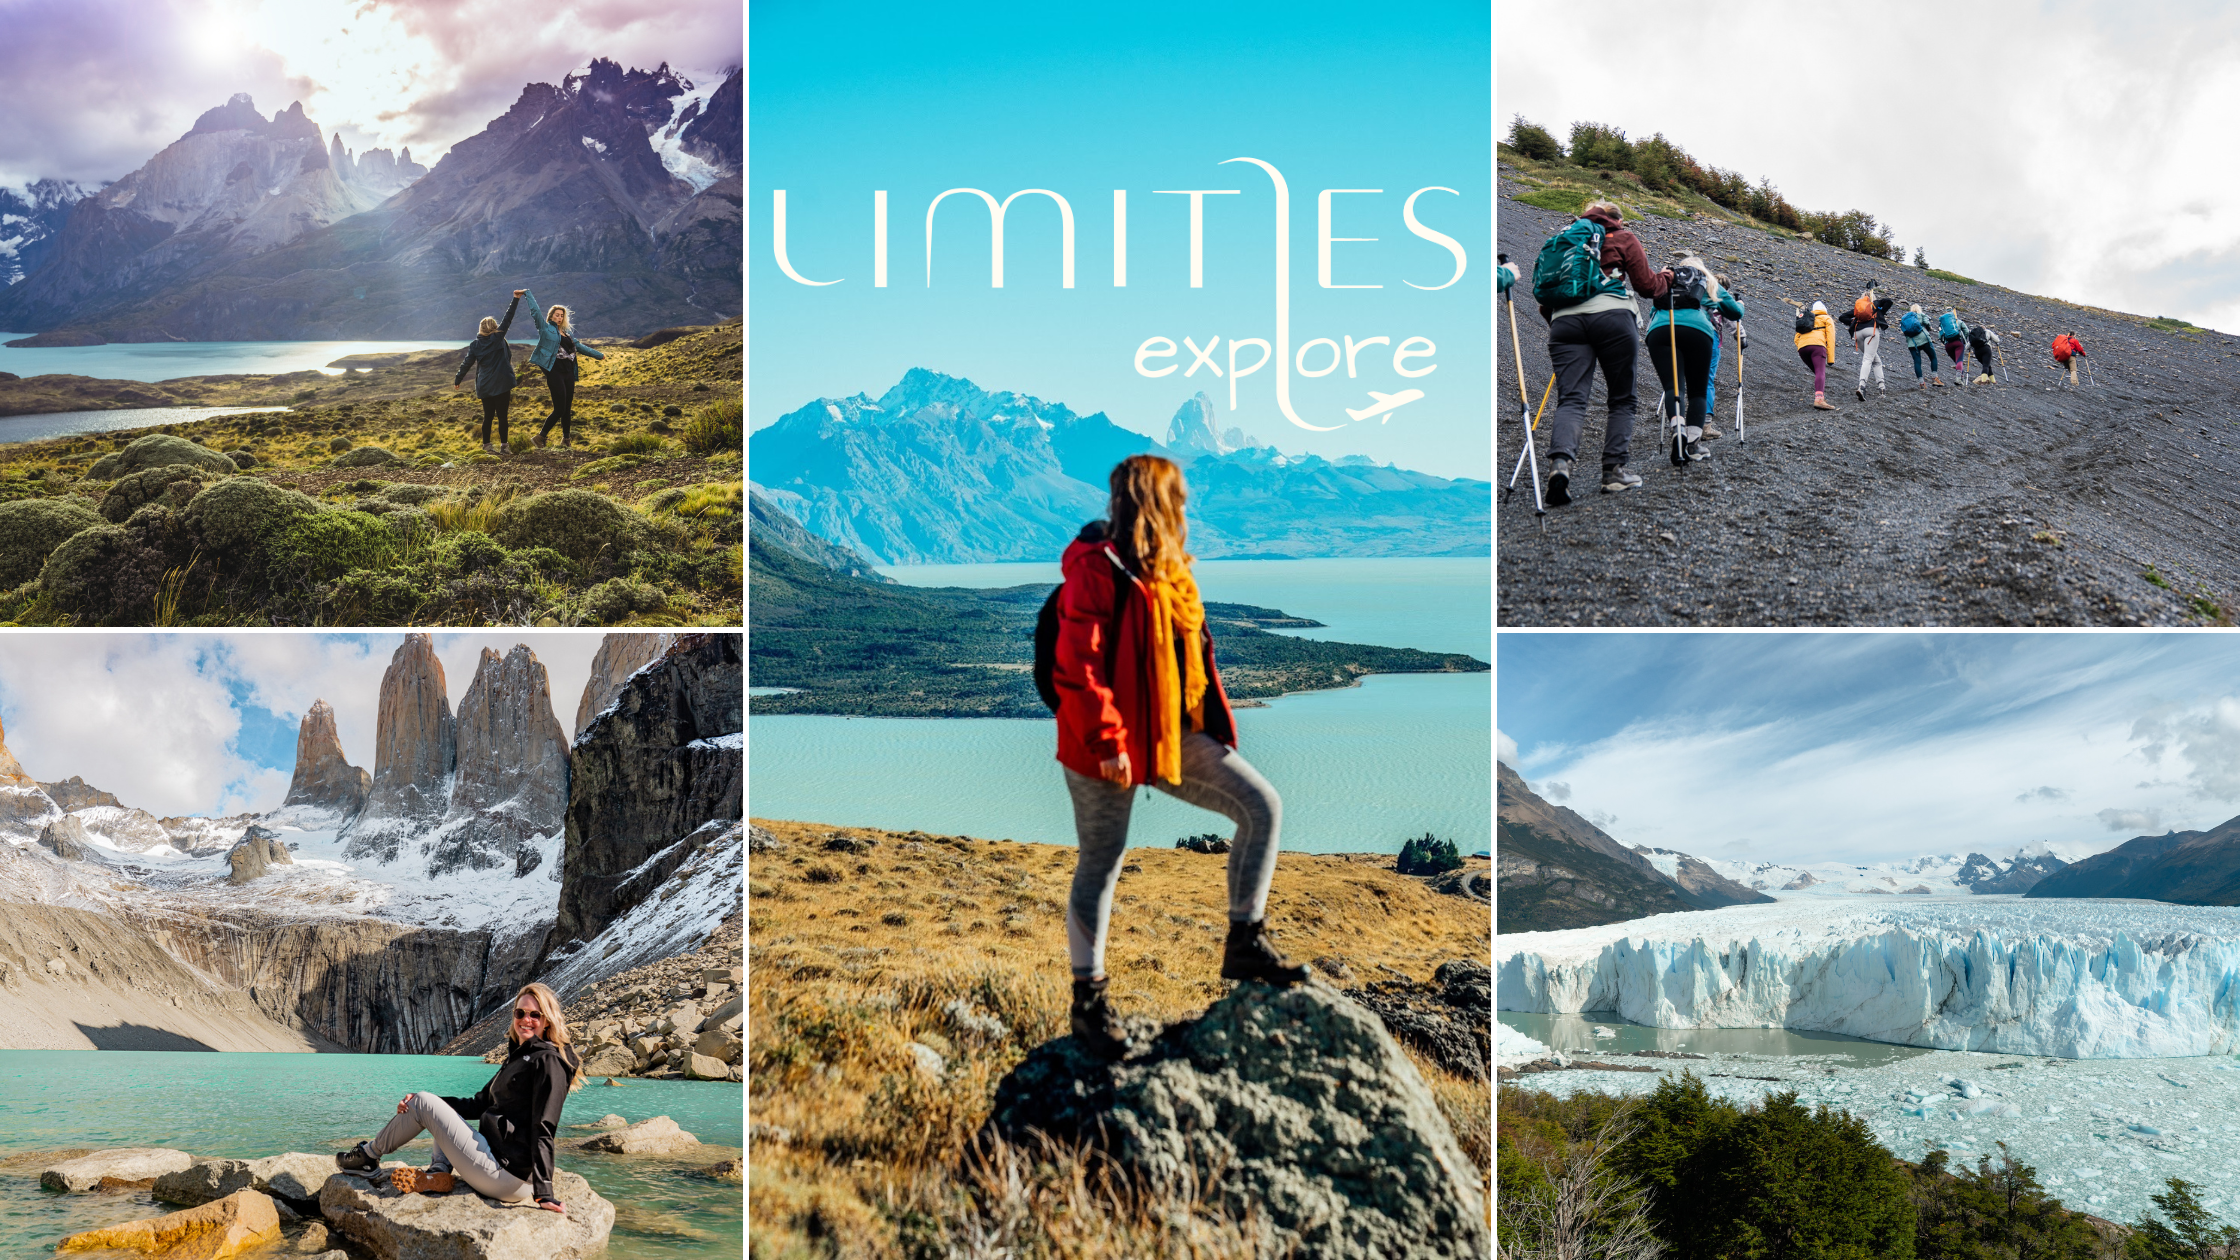 A collage of 5 photos. Top left is 2 women dancing in the Patagonia landscape in front of the Towers. Middle is a woman in red jacket mid-hike admiring her surroundings. Top right is a group of women hiking in line. Bottom left is LimitLes alumni Ruth P at the Base of the Towers. Bottom right is Peritto Moreno Glacier.